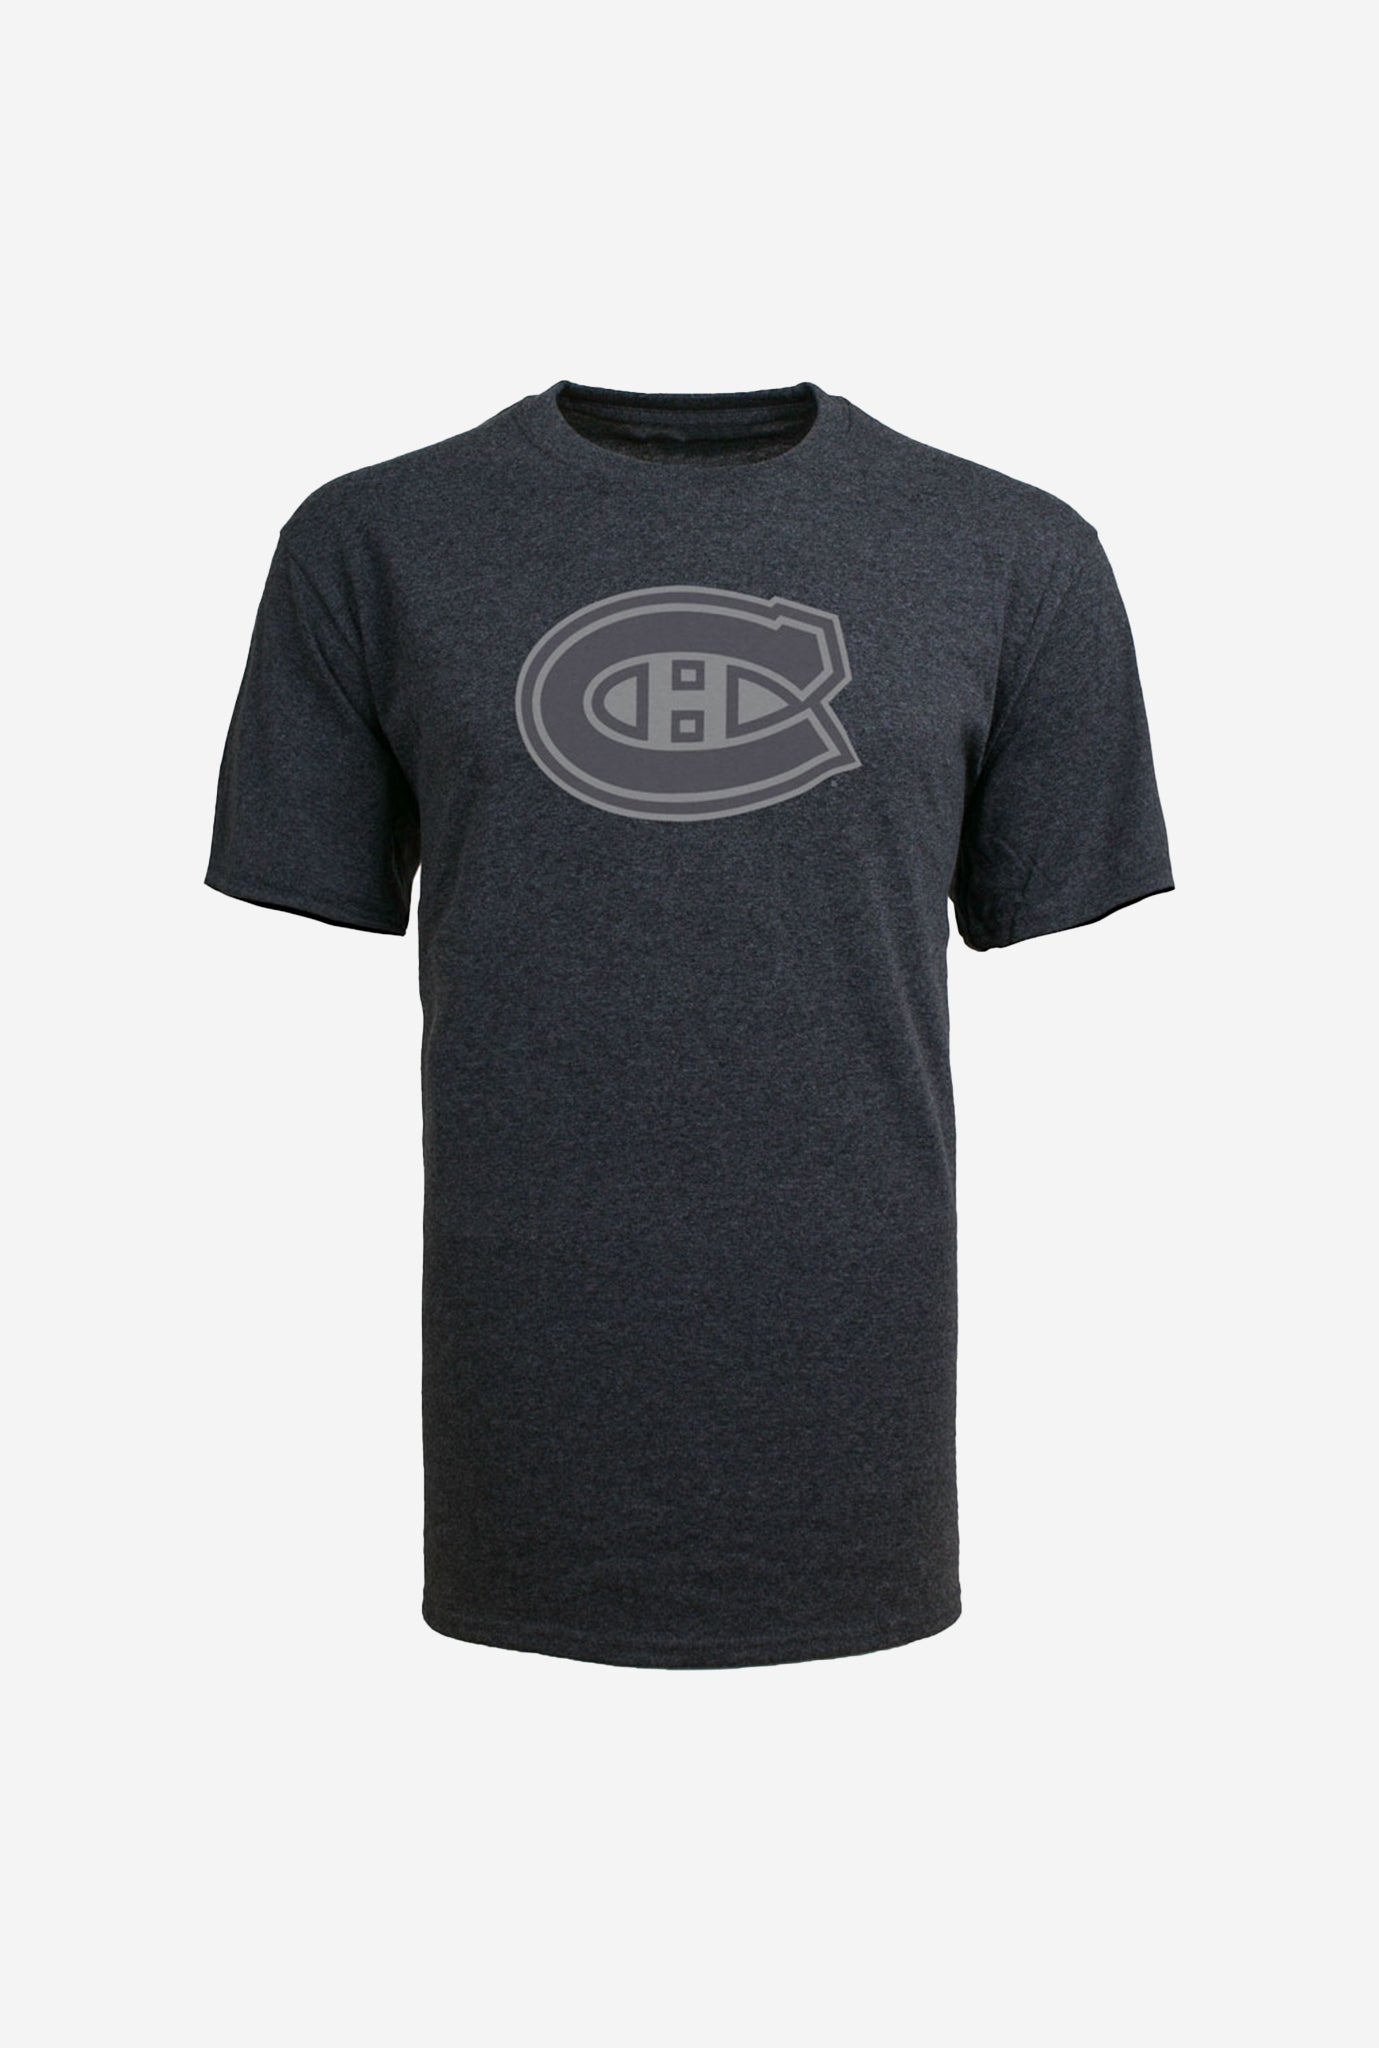 Montreal Canadiens Carbon T - Grey